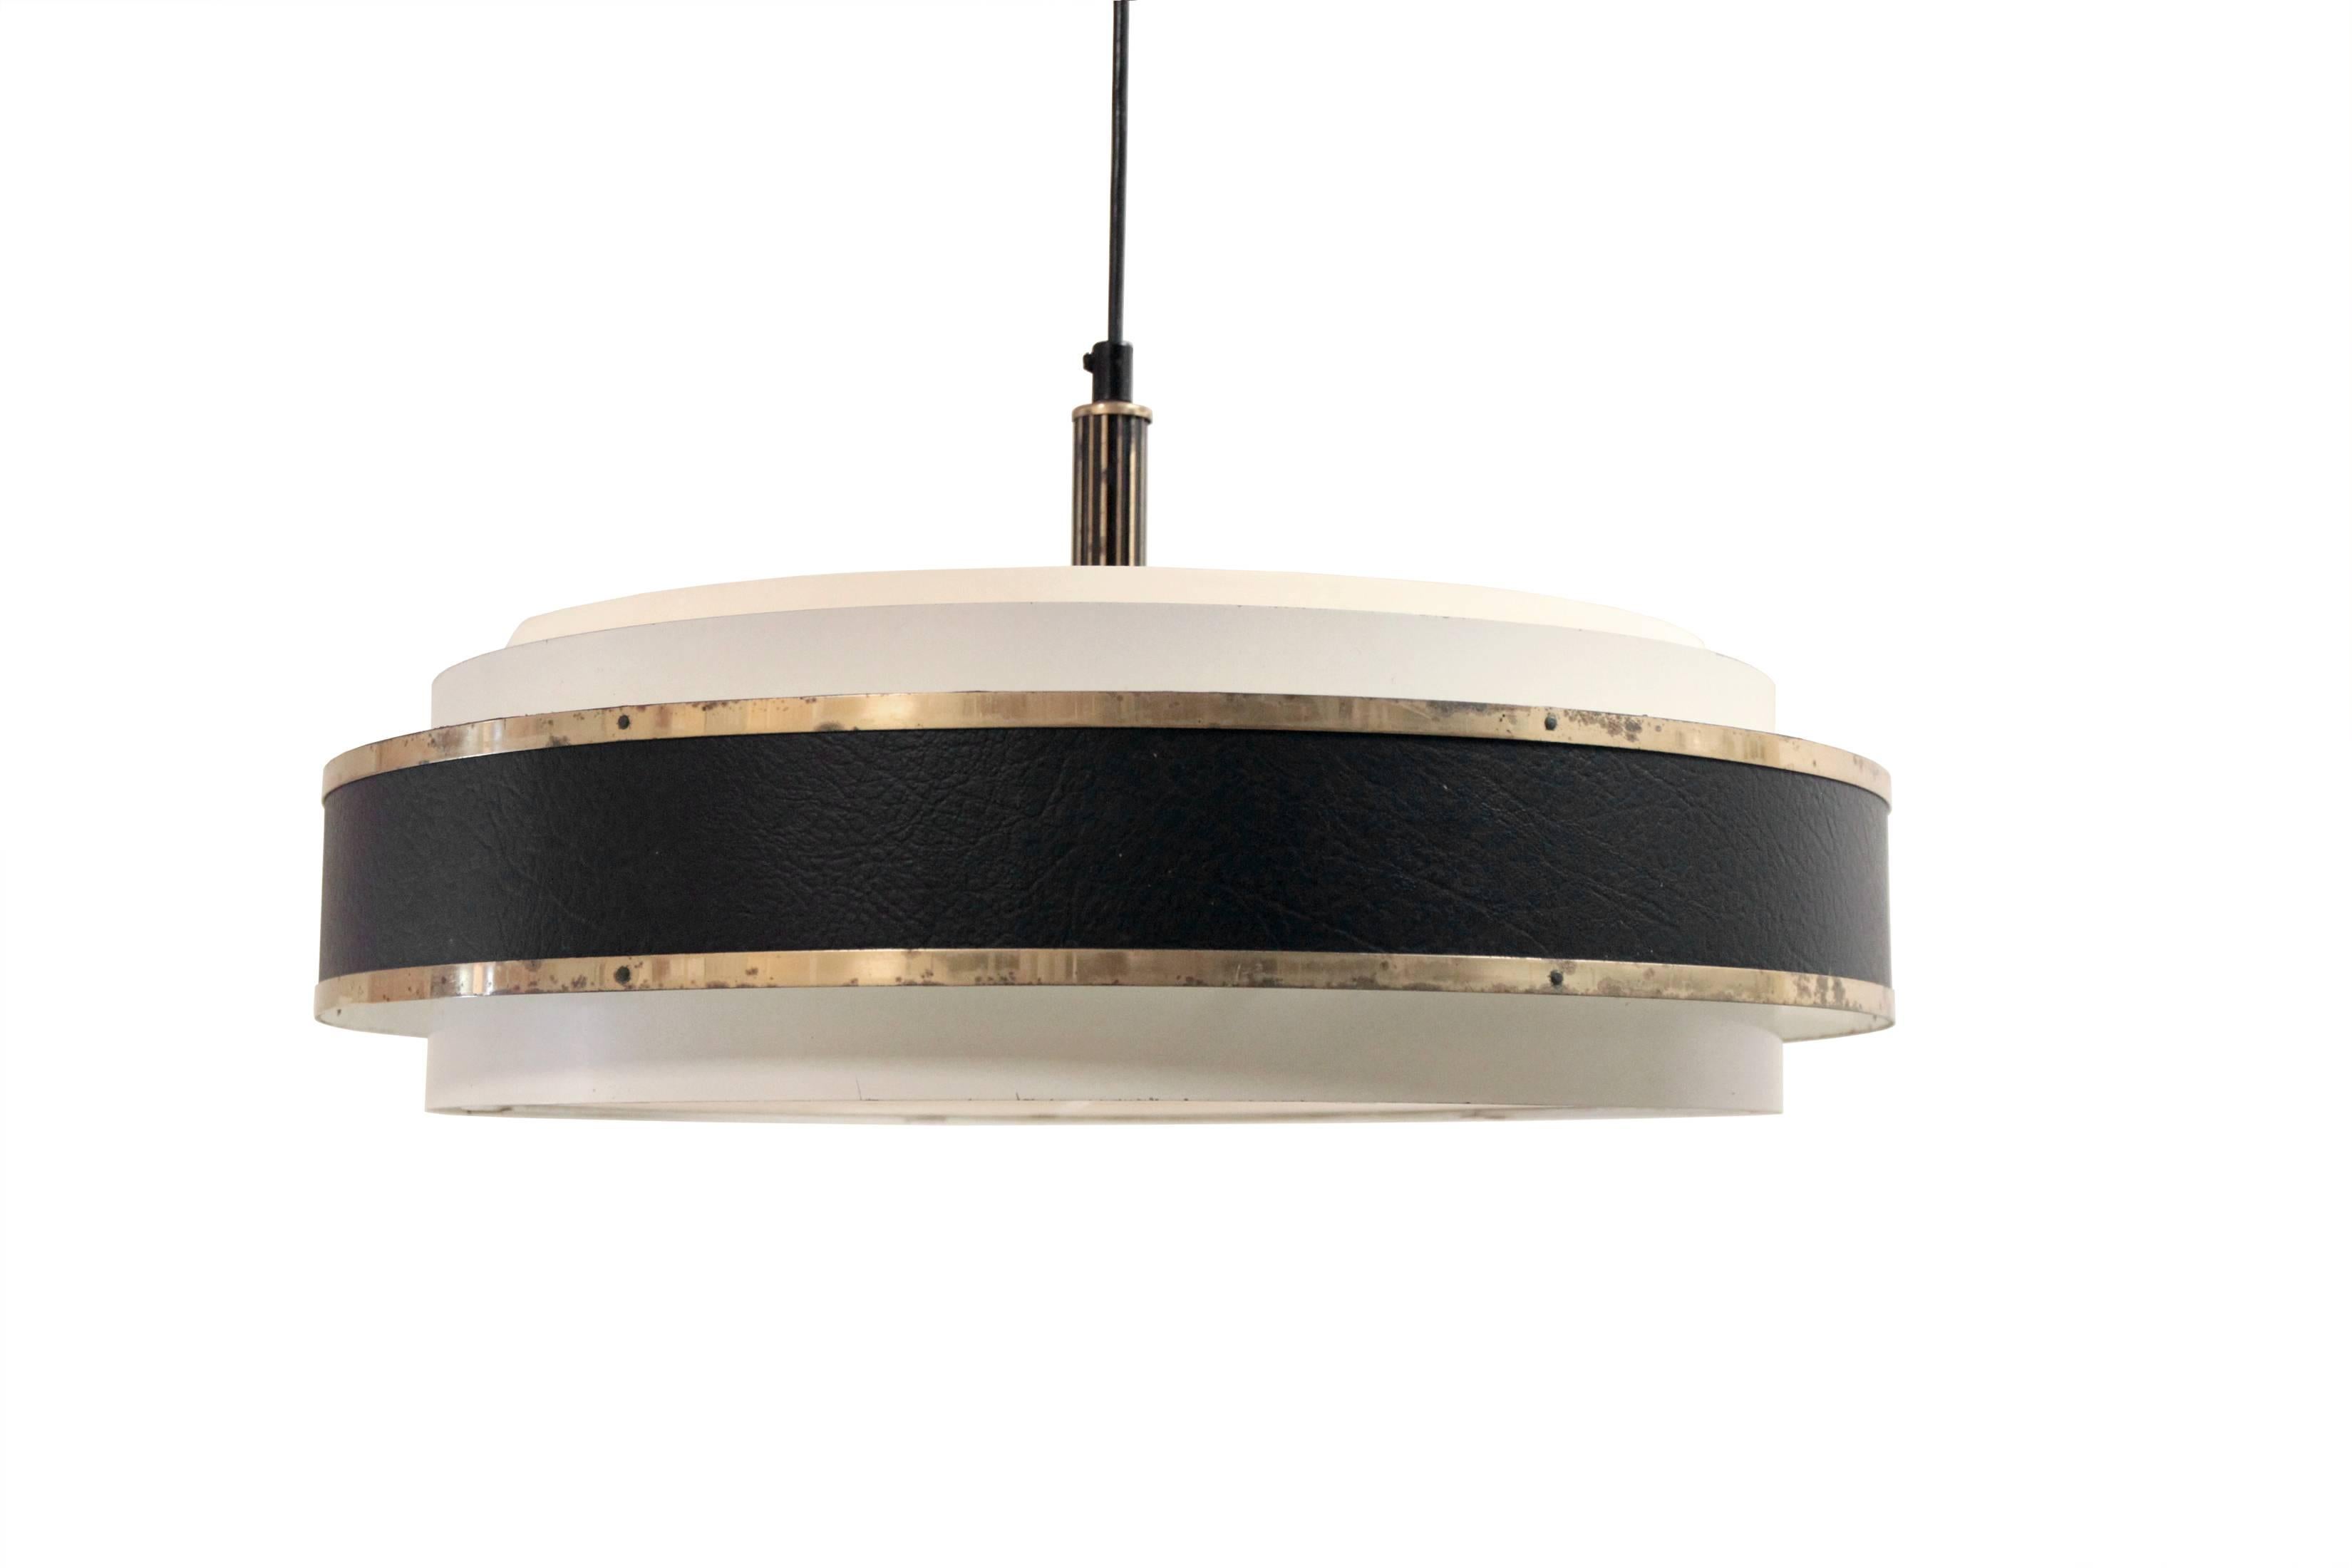 Wonderful and decorative ceiling lamp in painted steel, leather, brass and plastic. Designed and made in Finland from circa 1960s second half. The lamp is in a very good vintage condition and is fully working. There are three lamp sockets taking 75W